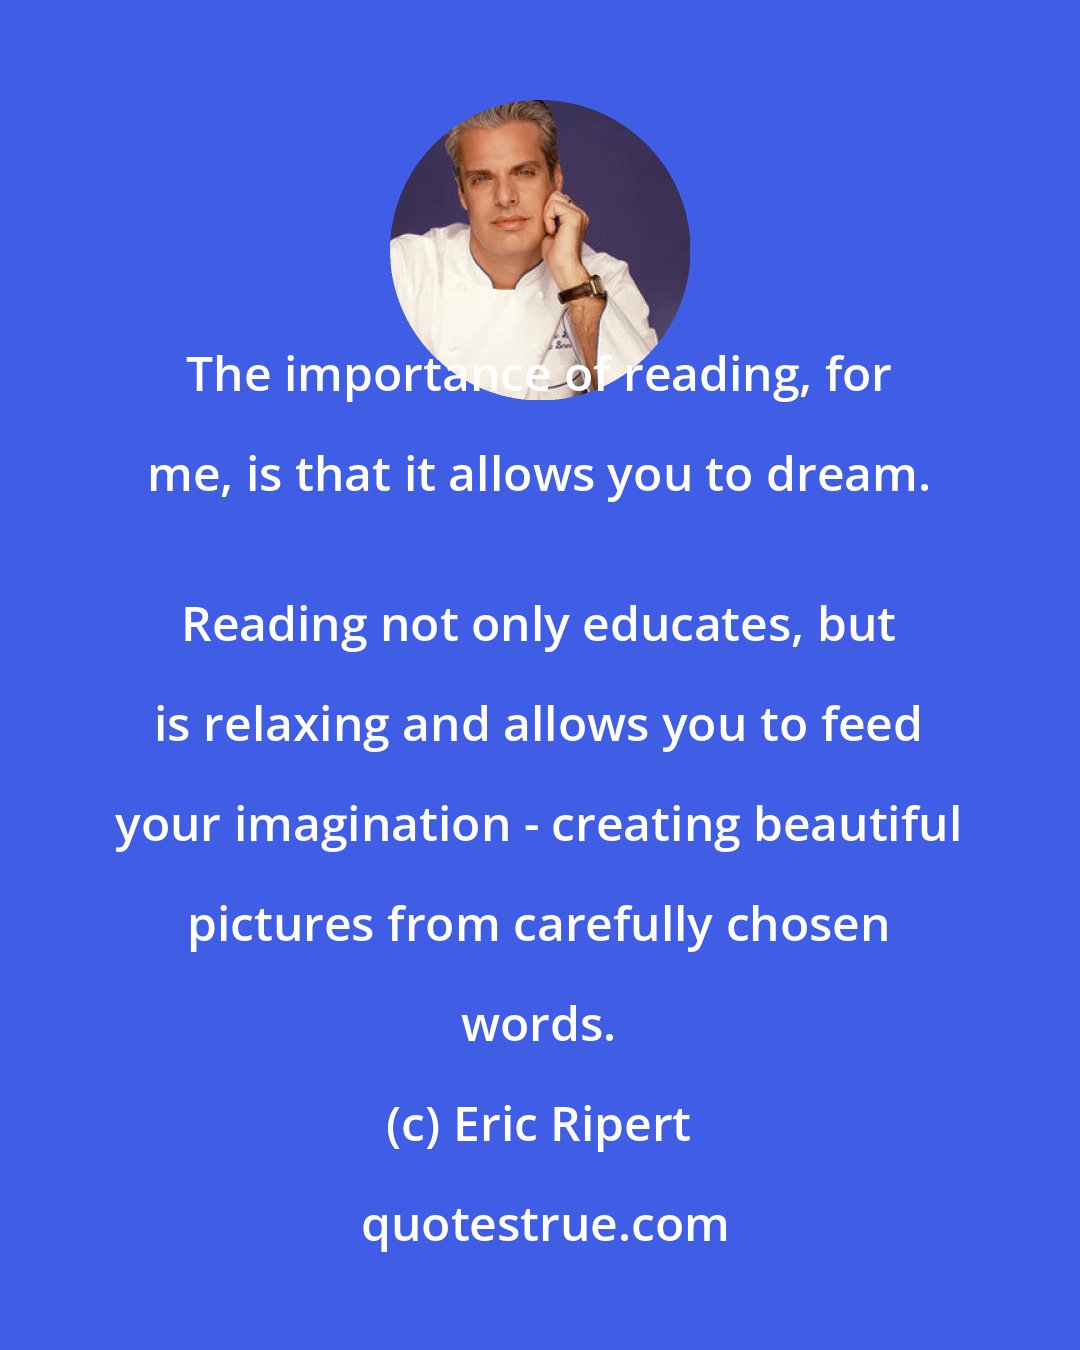 Eric Ripert: The importance of reading, for me, is that it allows you to dream. 
 Reading not only educates, but is relaxing and allows you to feed your imagination - creating beautiful pictures from carefully chosen words.